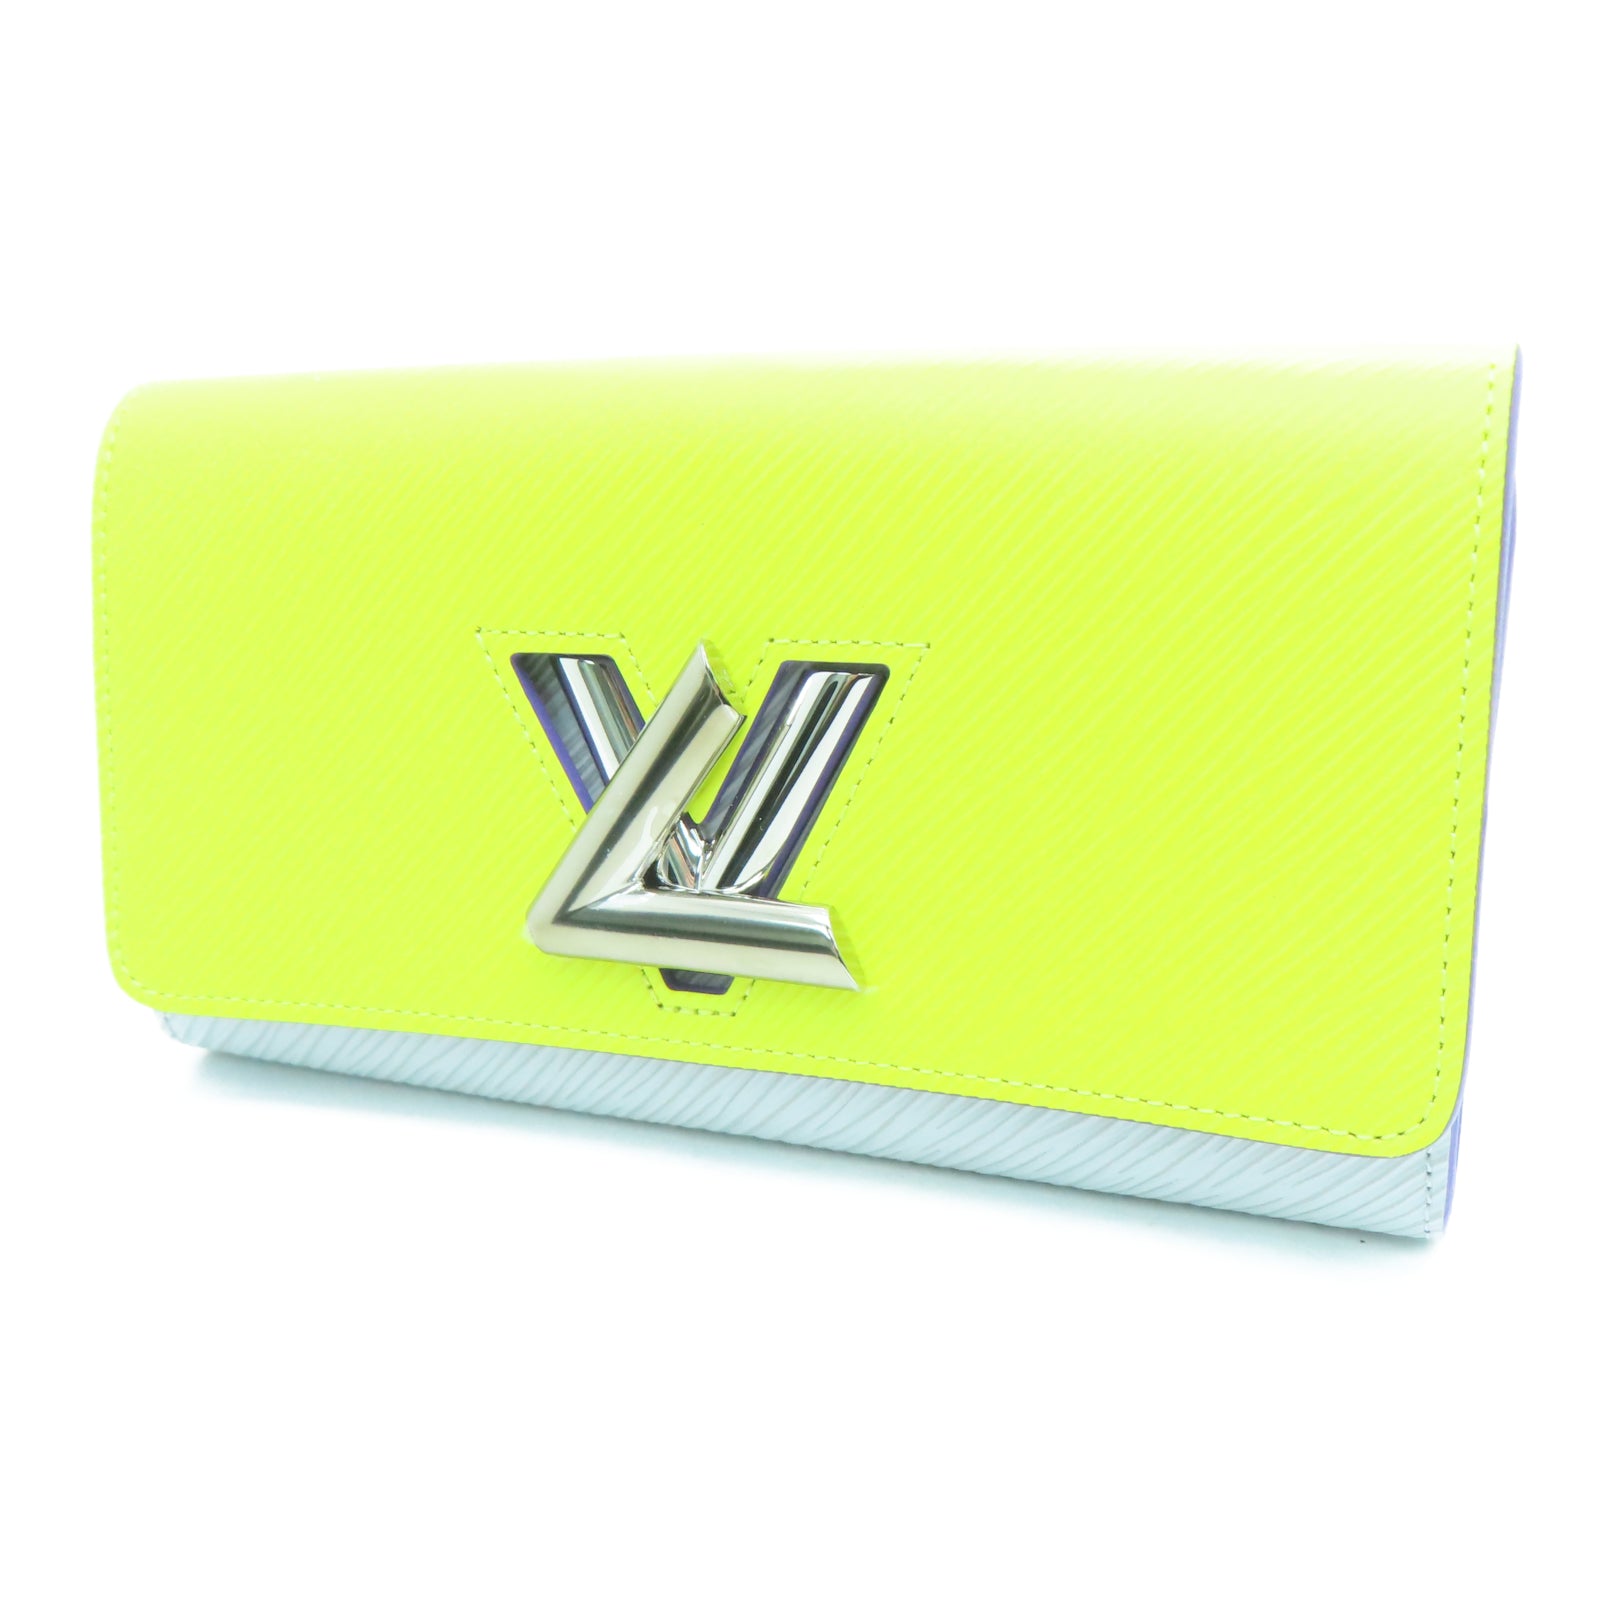 LOUIS VUITTON Epi Leather Twist Wallet Silver Buckle Wallet Yellow/Pur –  Brand Off Hong Kong Online Store